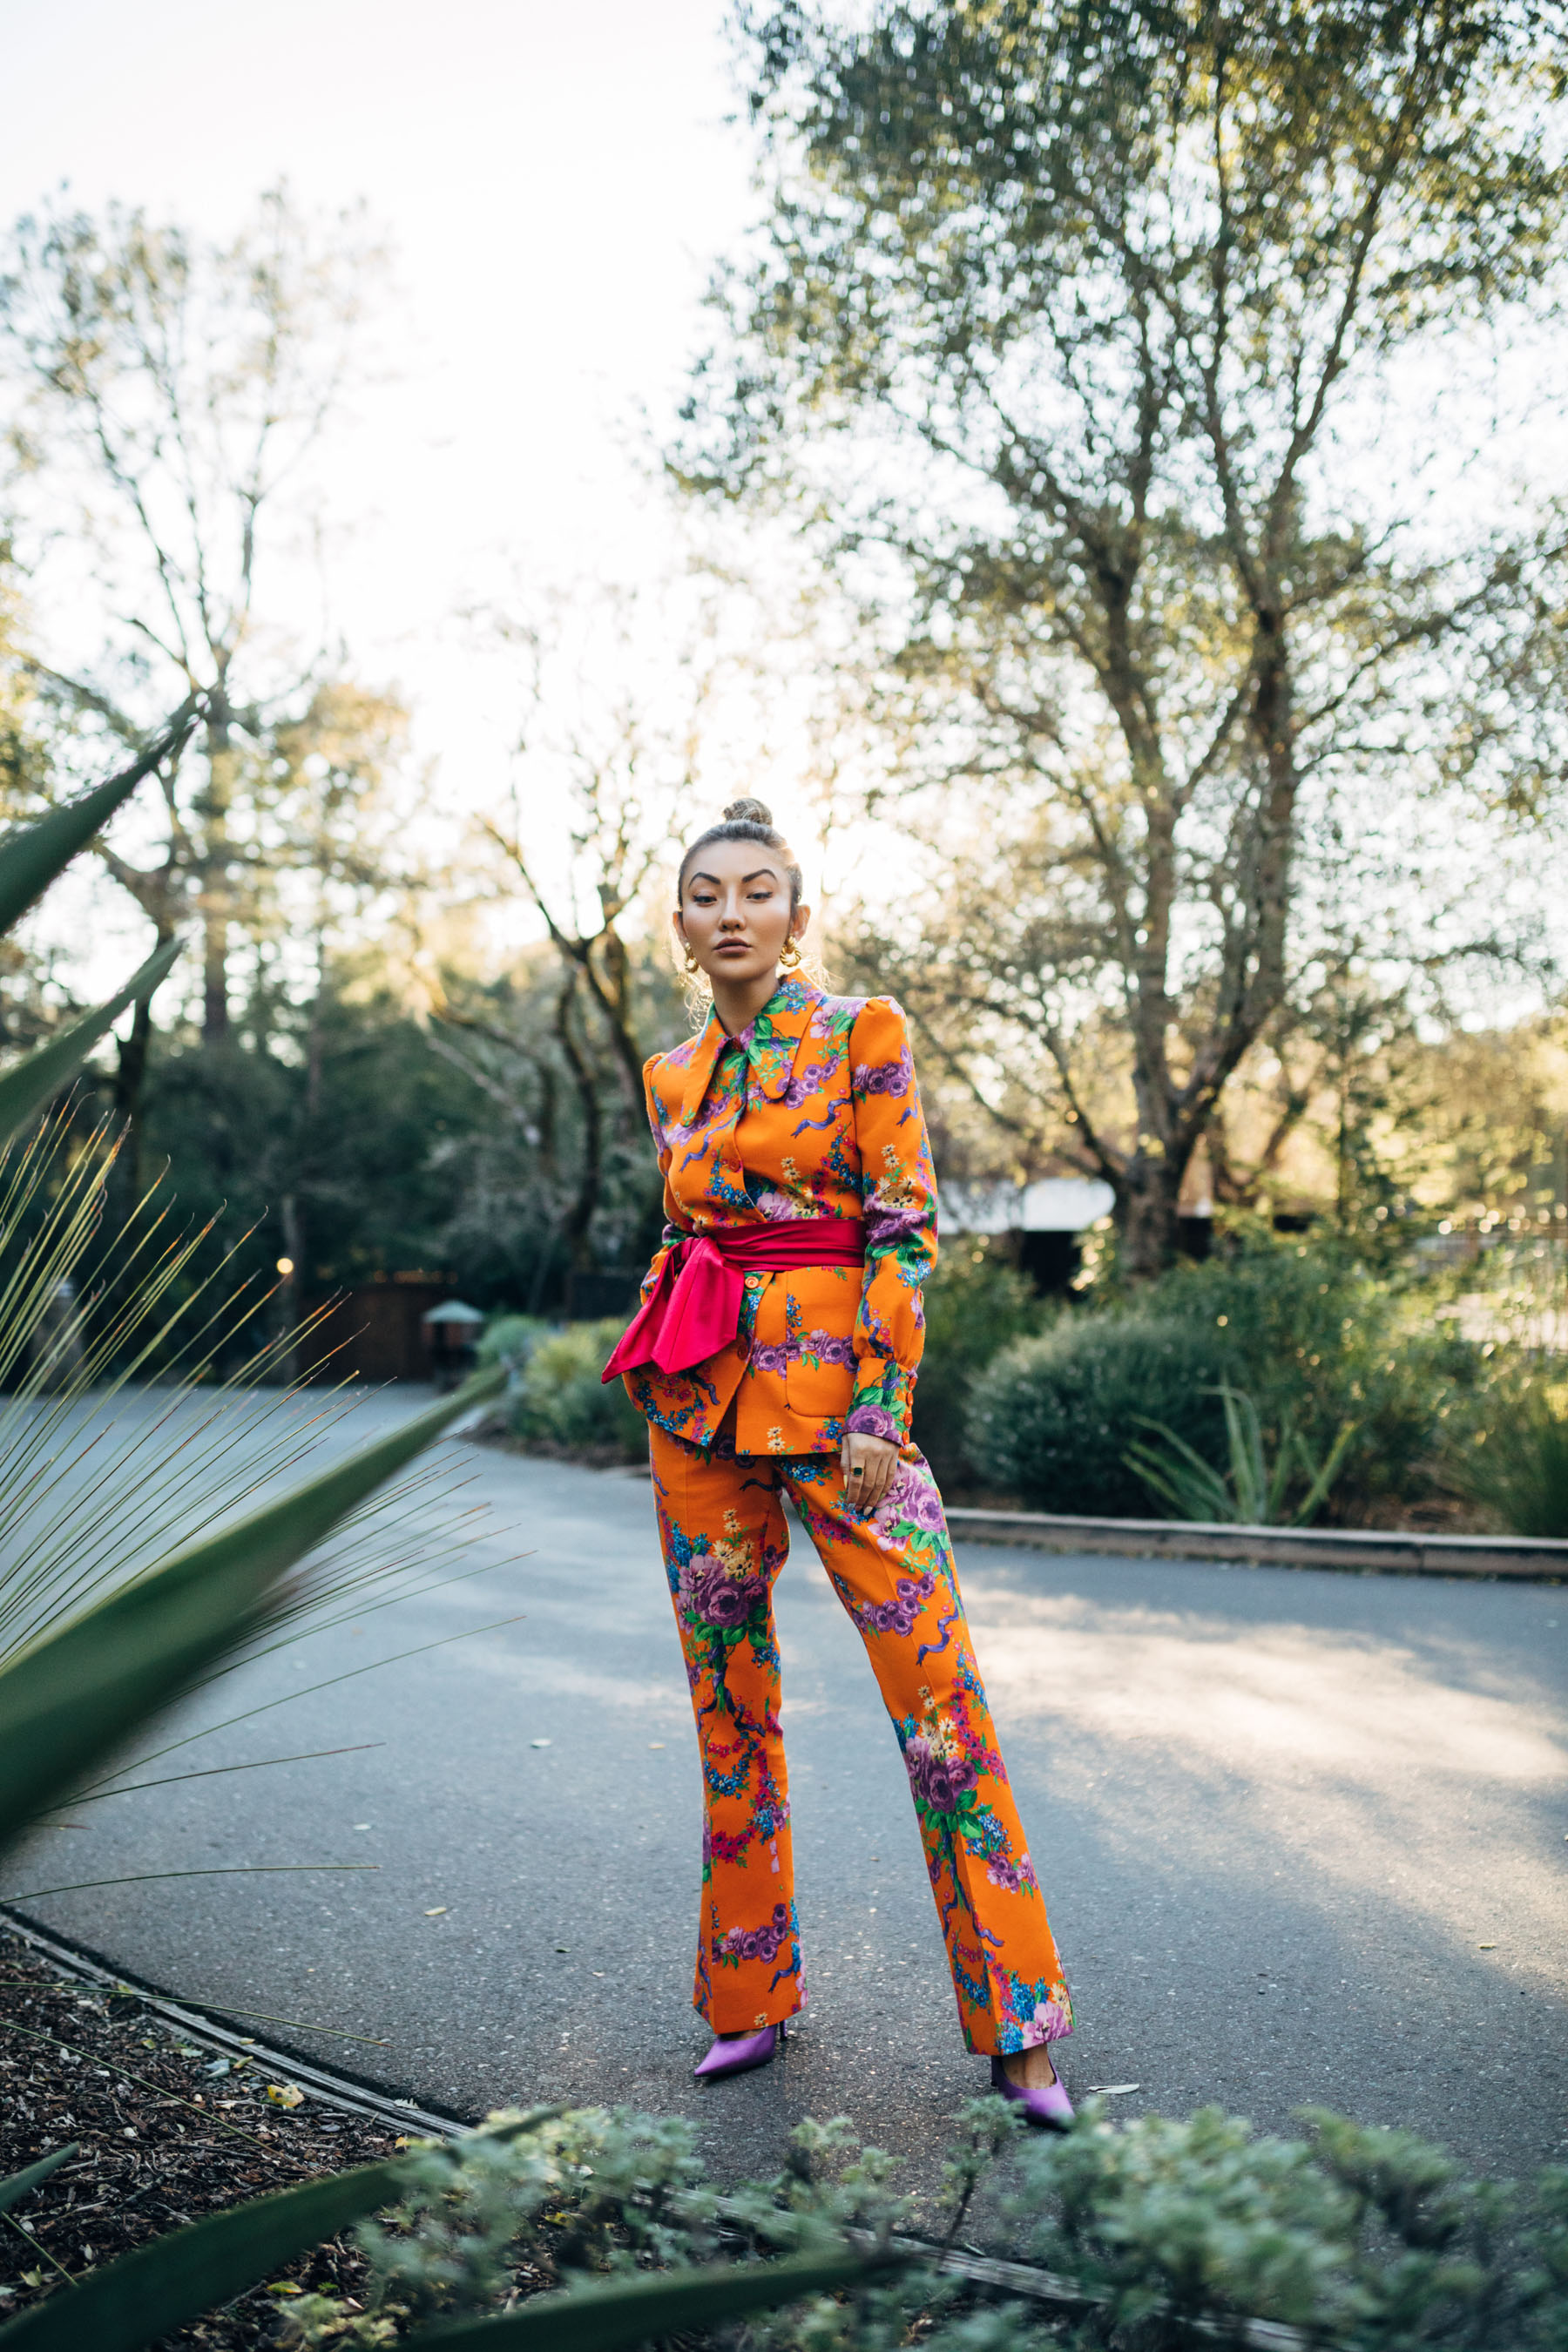 neon trend, full neon outfit, neon outfit inspiration, neon fashion, neon suit // Notjessfashion.com